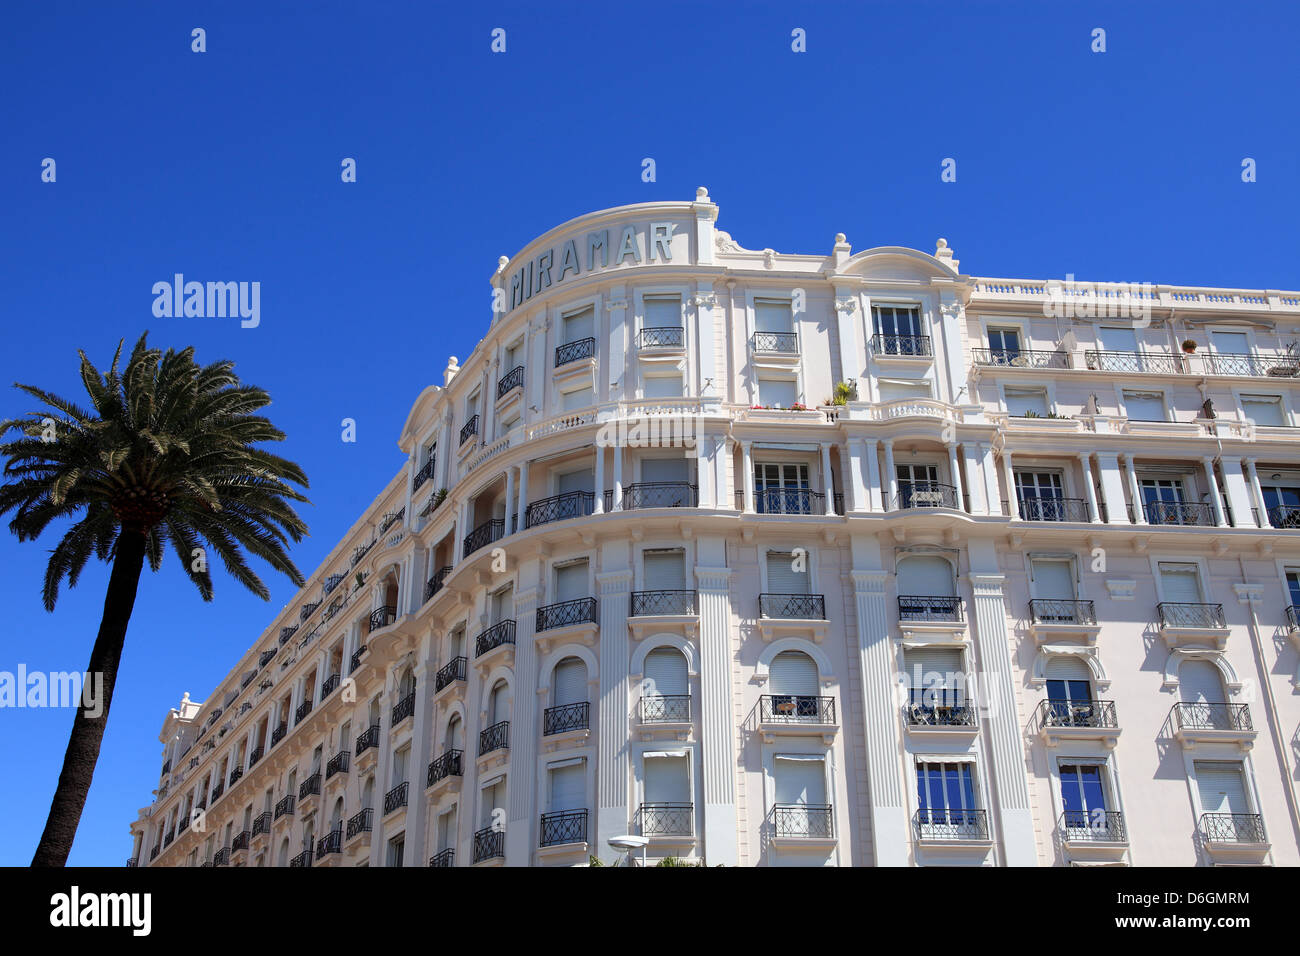 The Miramar building in Cannes Croisette, French Riviera, France Stock Photo